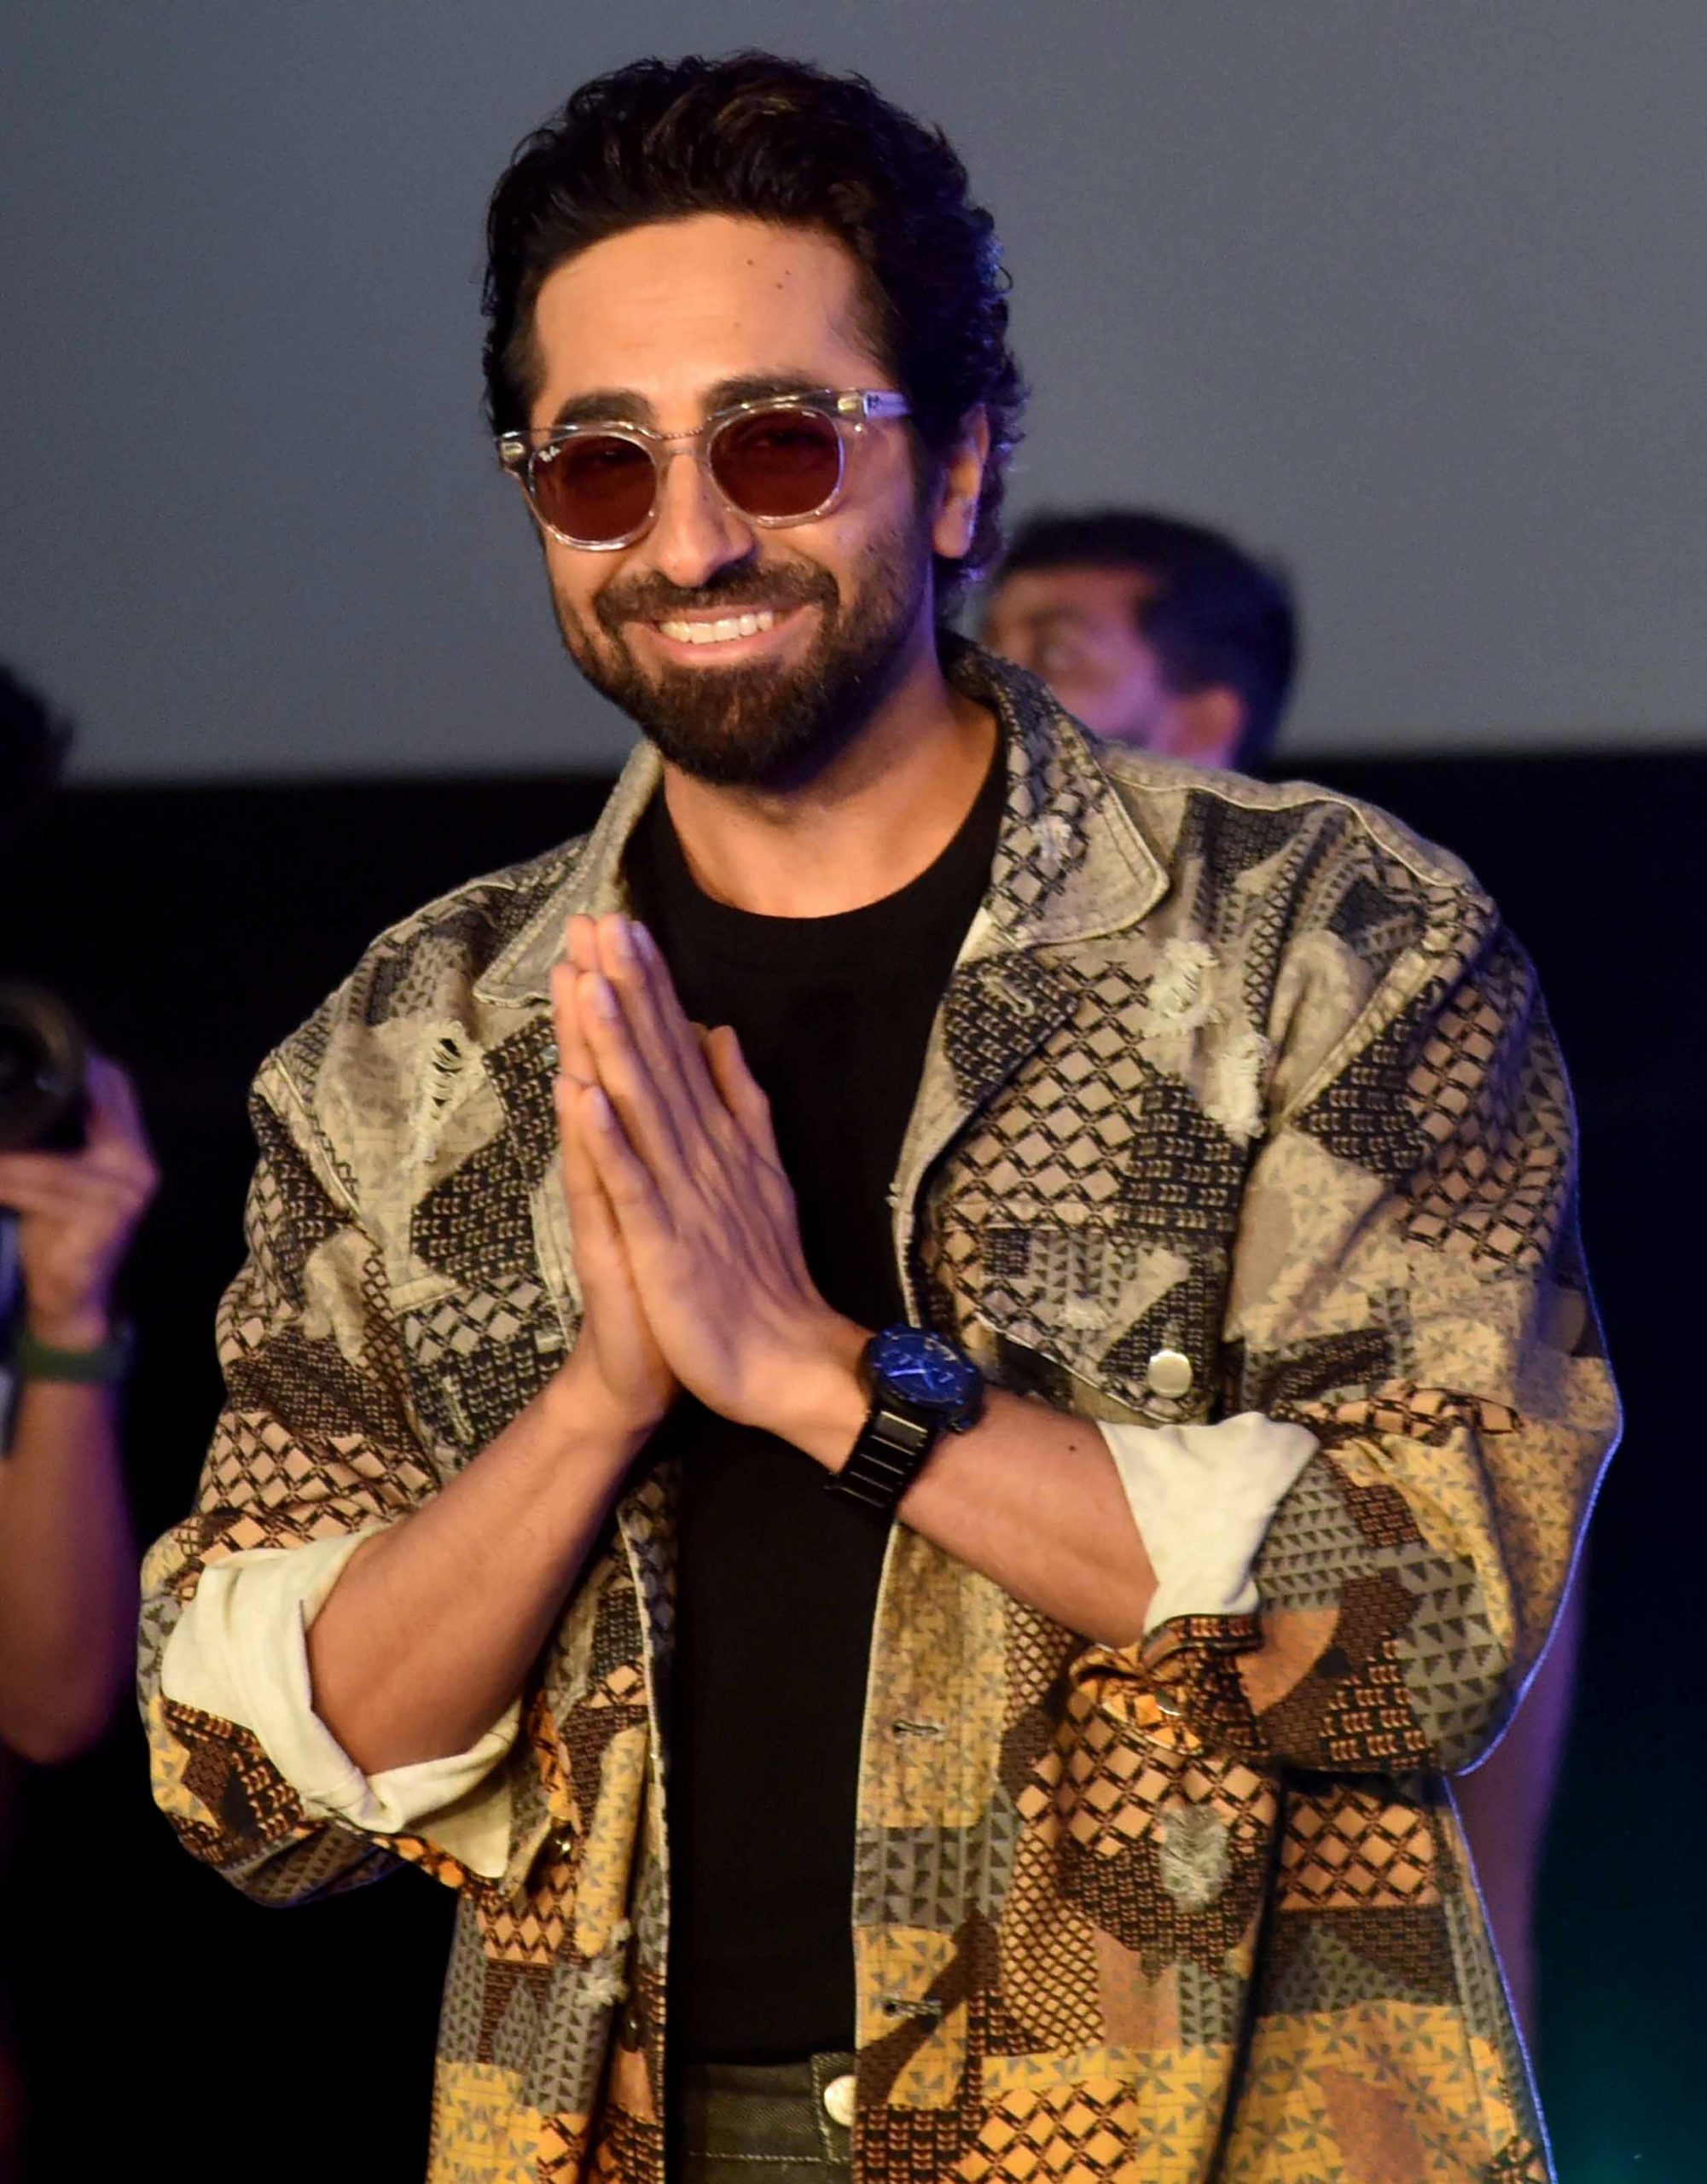 Used to share room with cook when I first came to Mumbai: Ayushmann Khurrana